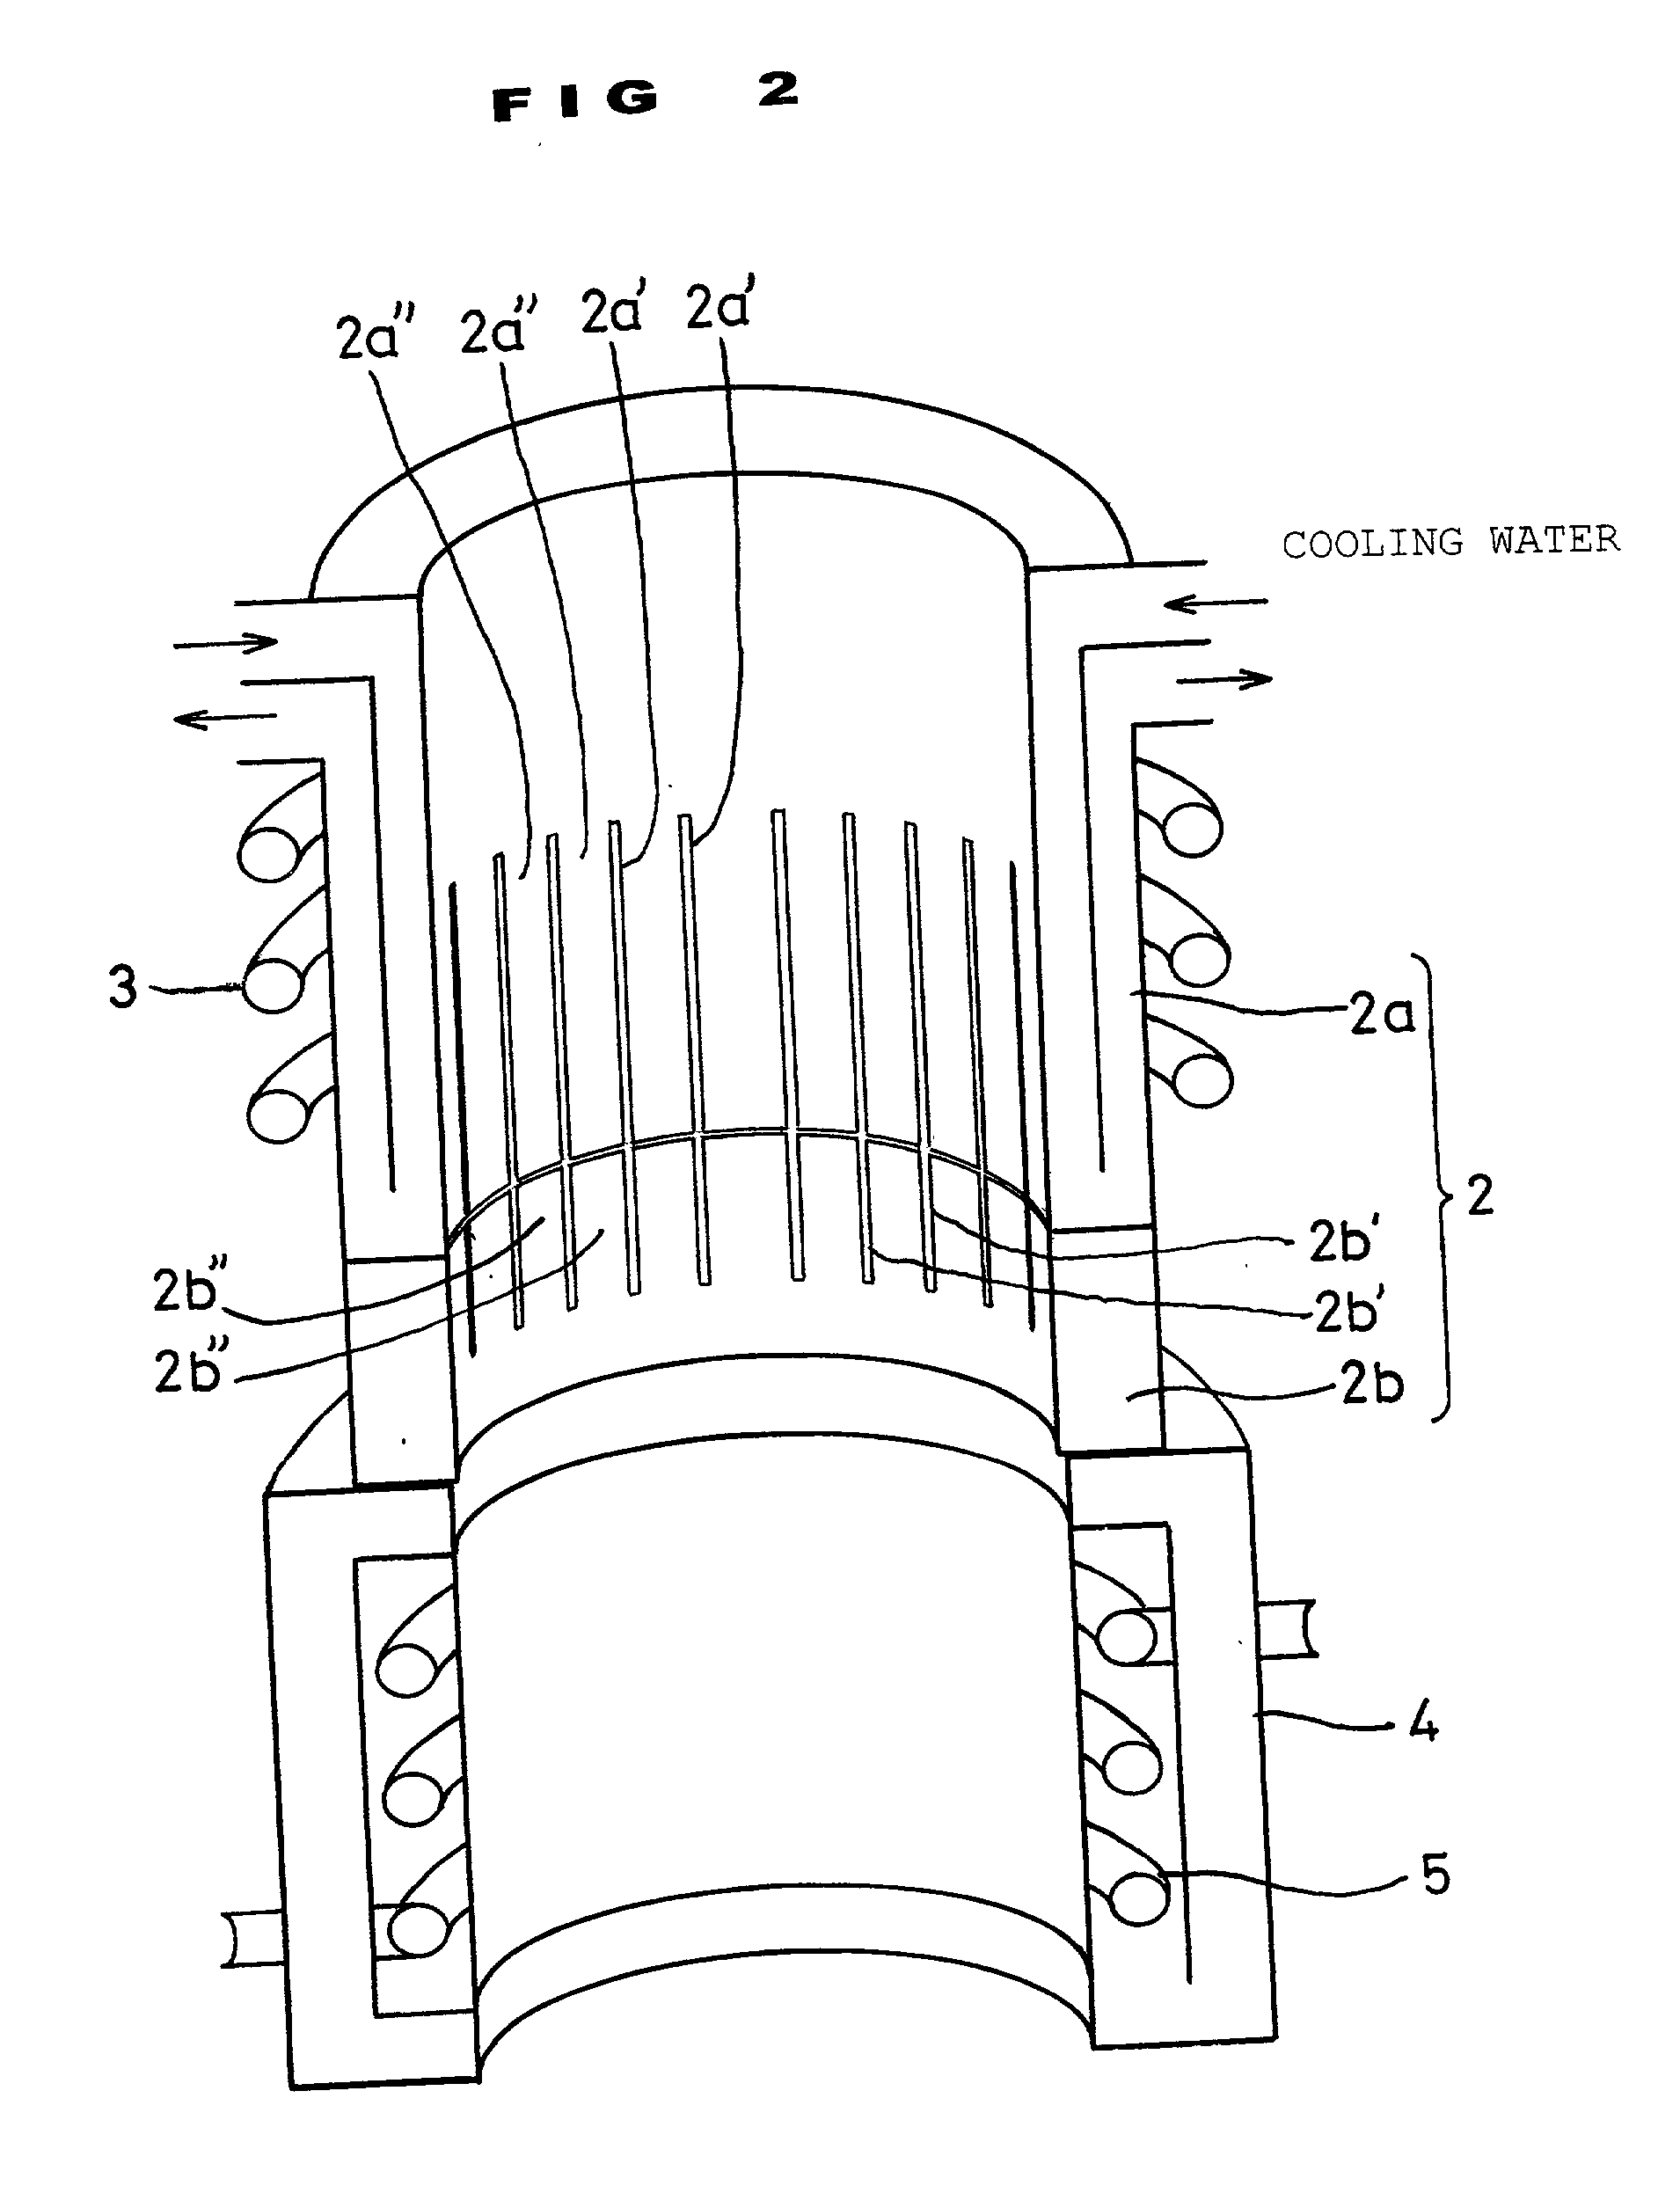 Electromagnetic induction casting apparatus